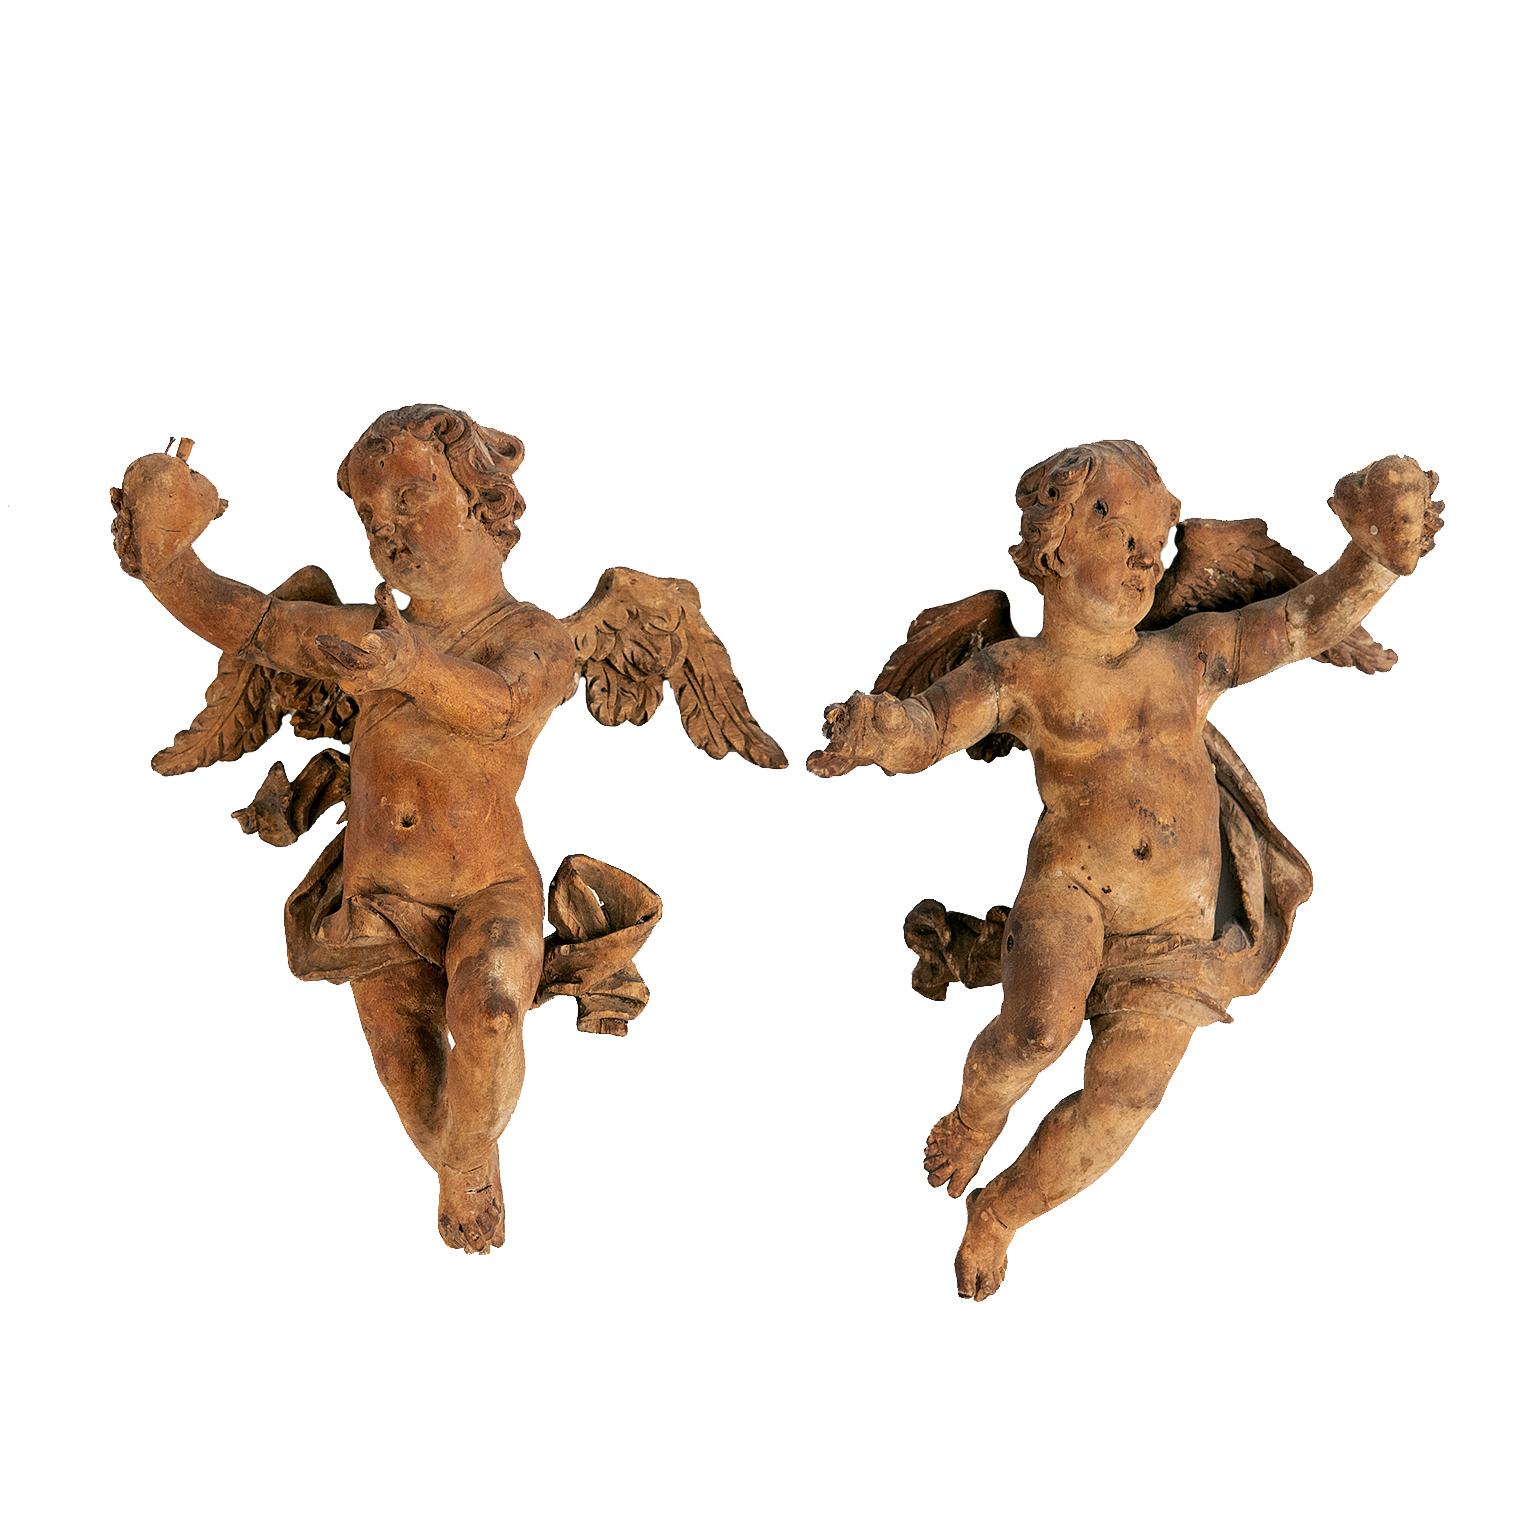 Pair of Italian Carved Wood Figures of Putti, Cherub, Angels, Late 18th Century